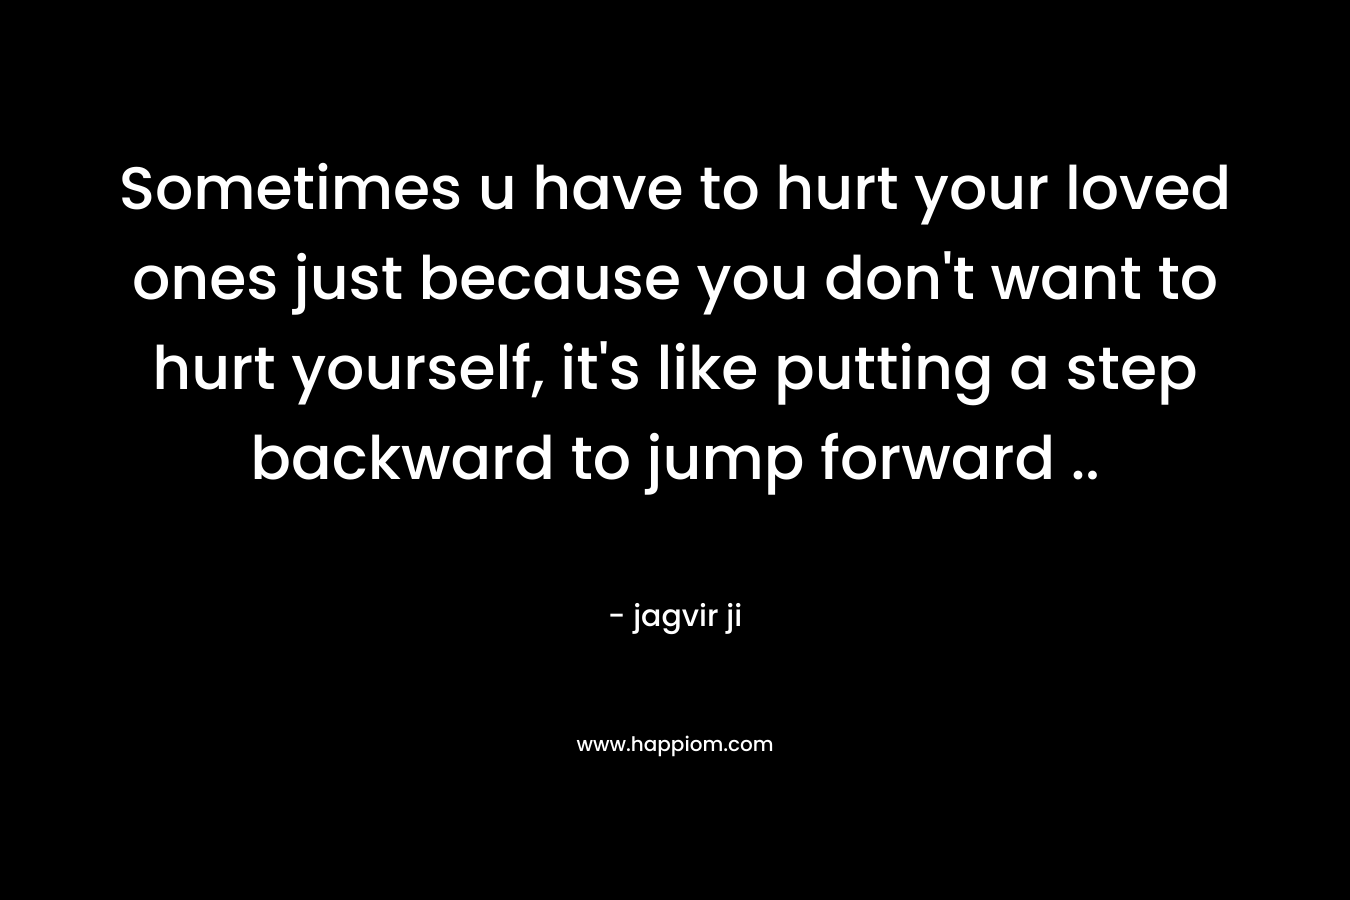 Sometimes u have to hurt your loved ones just because you don't want to hurt yourself, it's like putting a step backward to jump forward ..